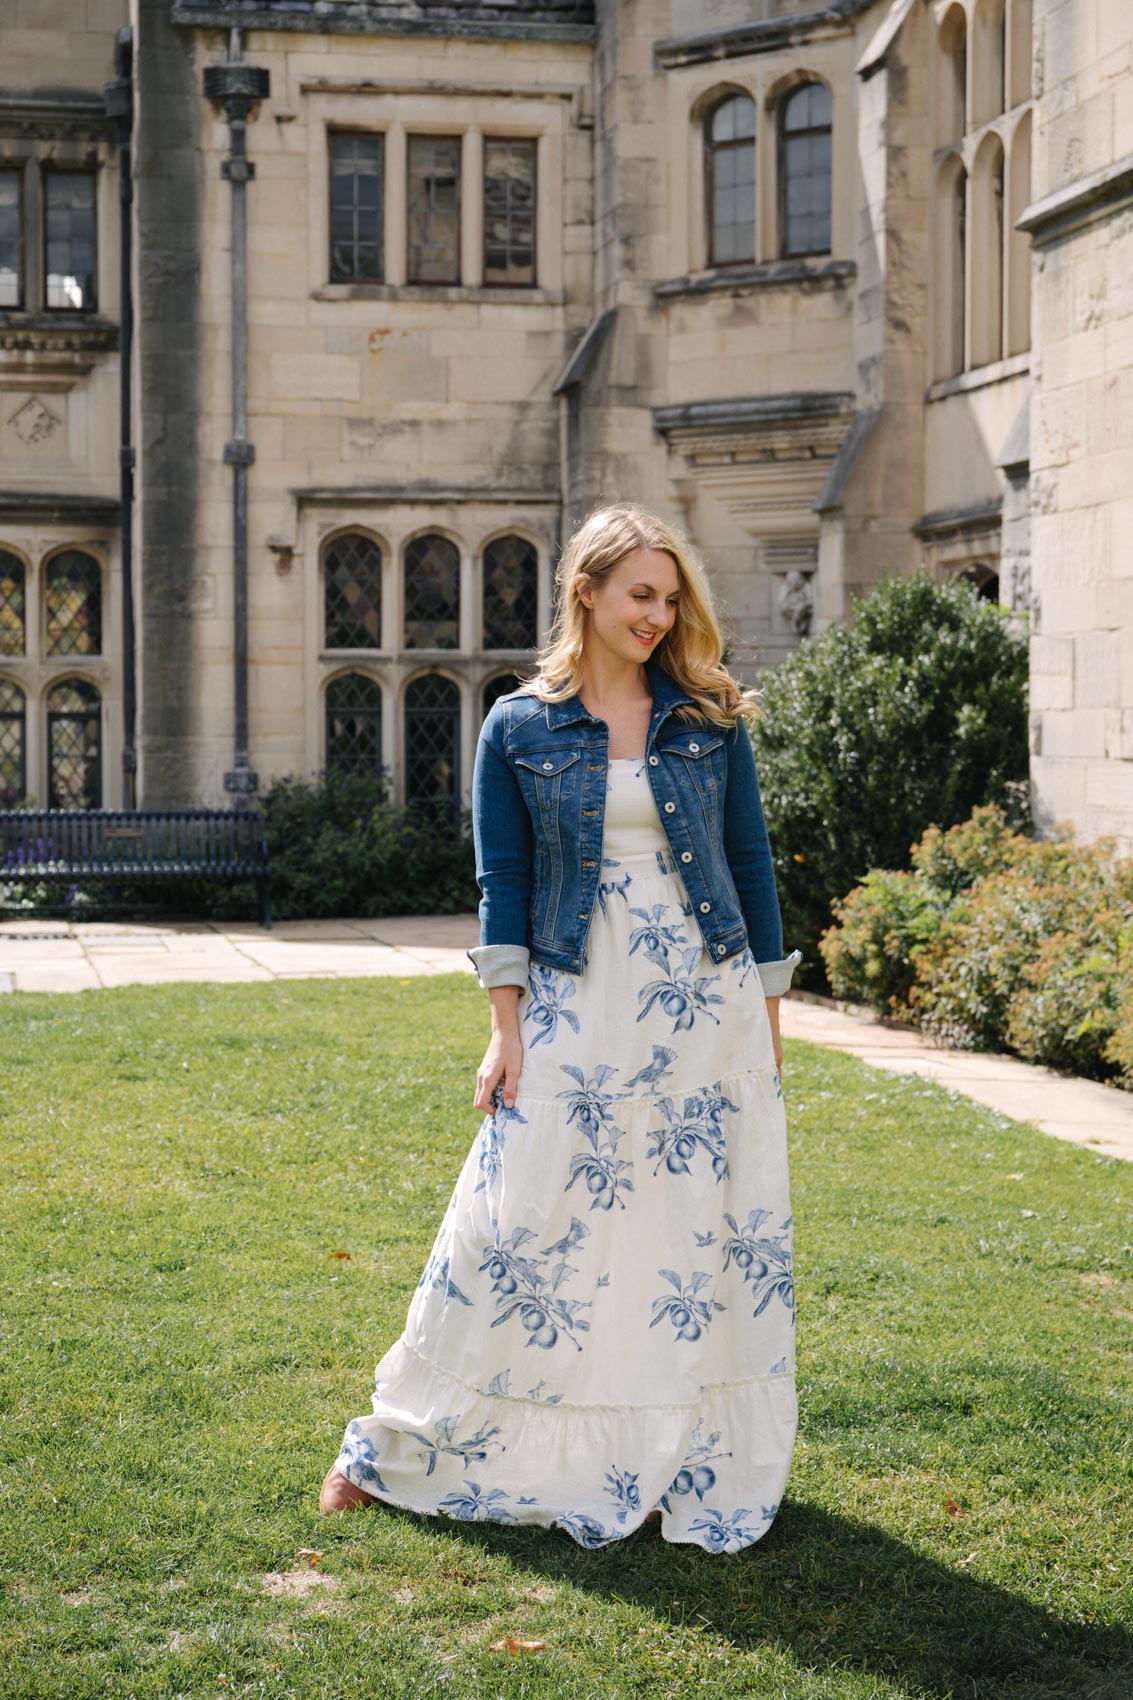 Two Easy Looks For Summer - Styled Snapshots | Denim jacket with dress,  Light denim jacket, Fashion dresses casual